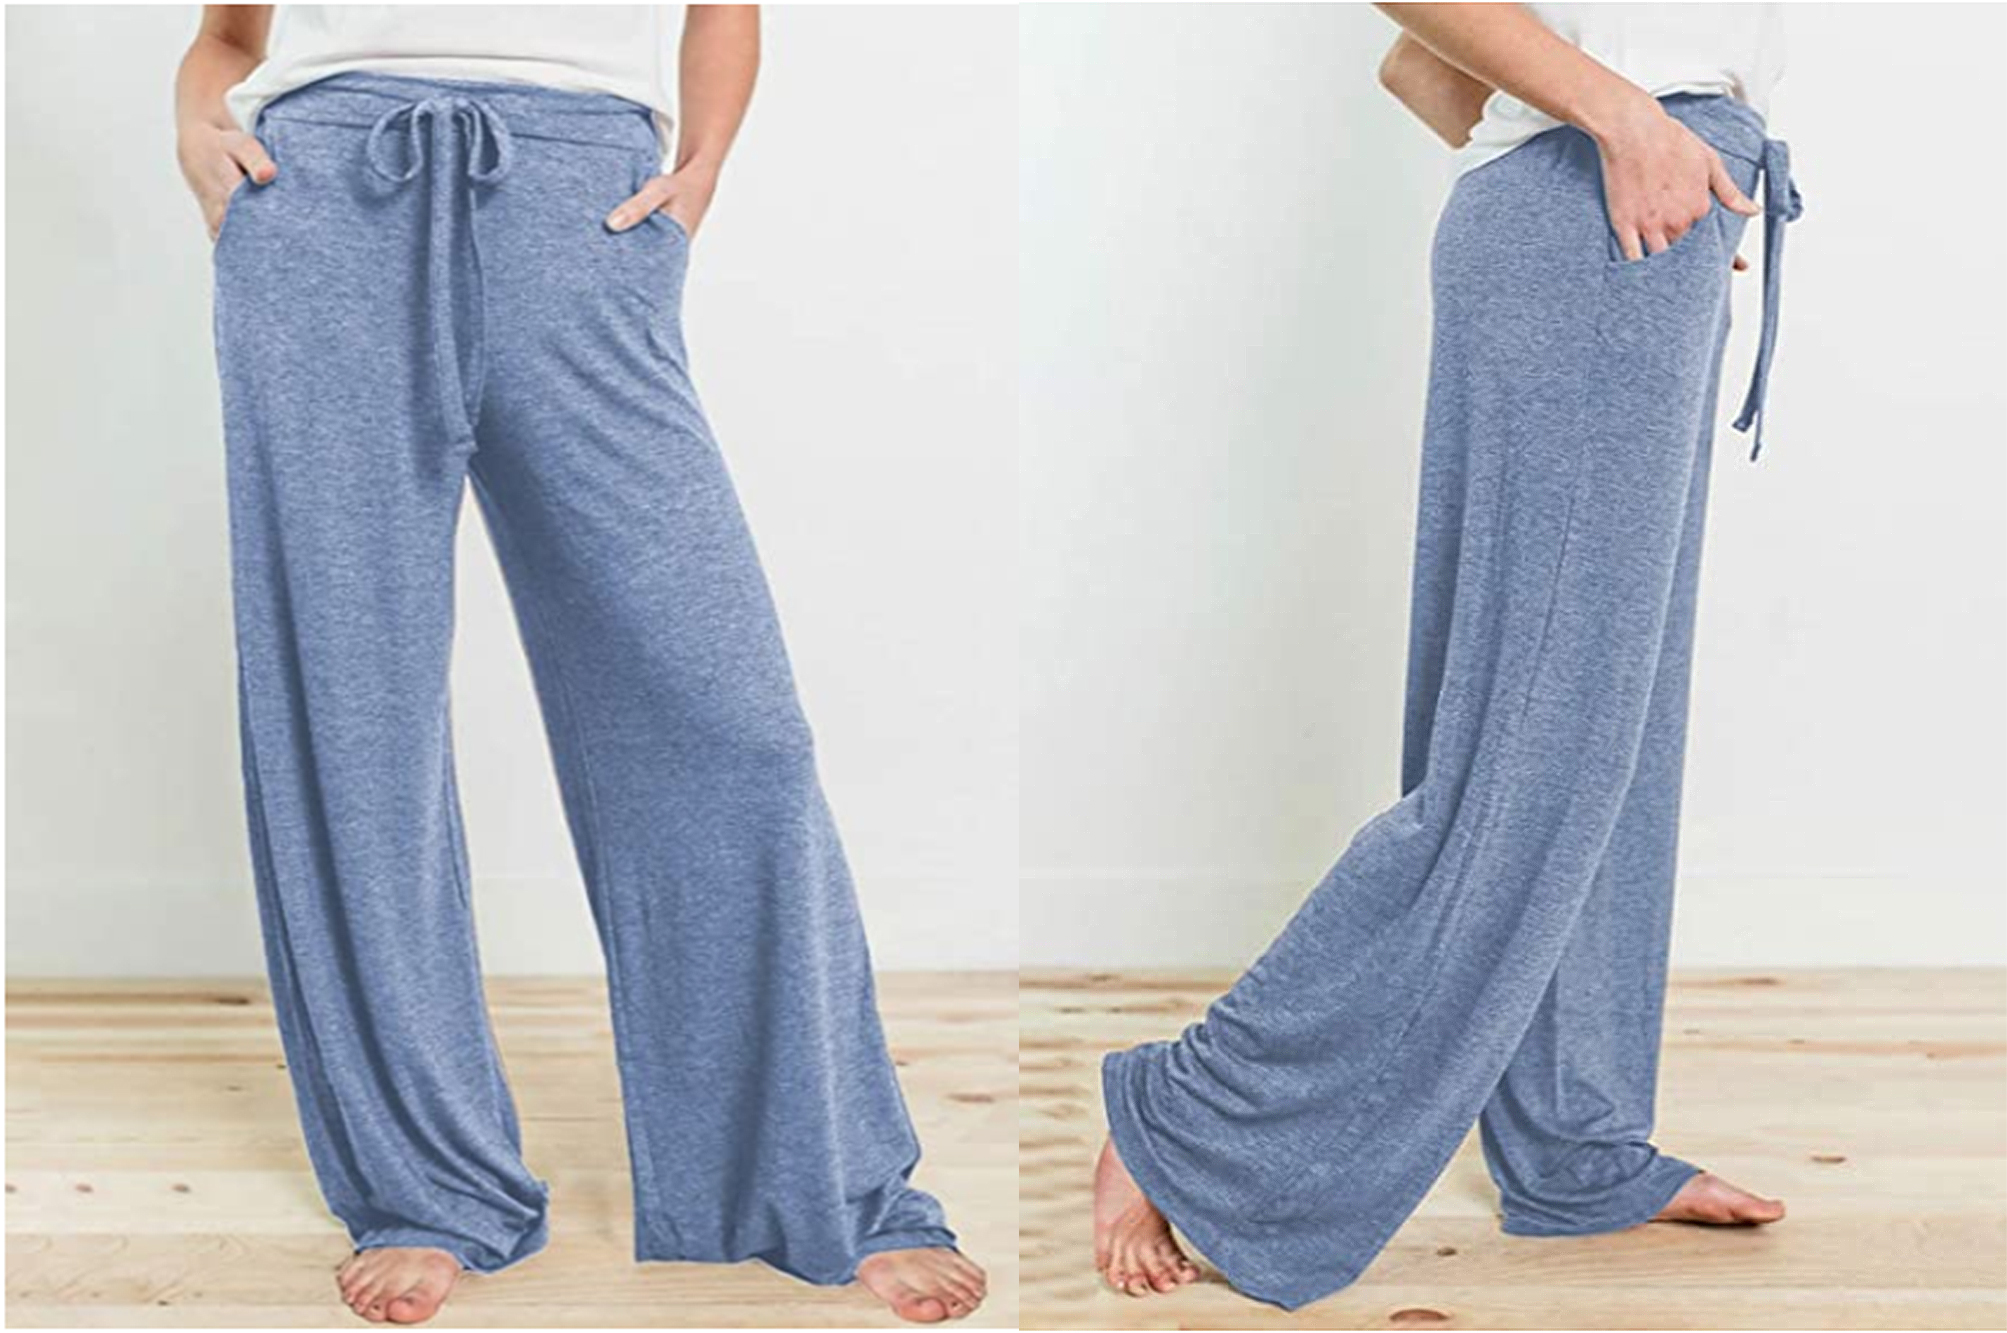 PRETTYGARDEN Soft Lounge Pants Are Even Cozier Than They Look